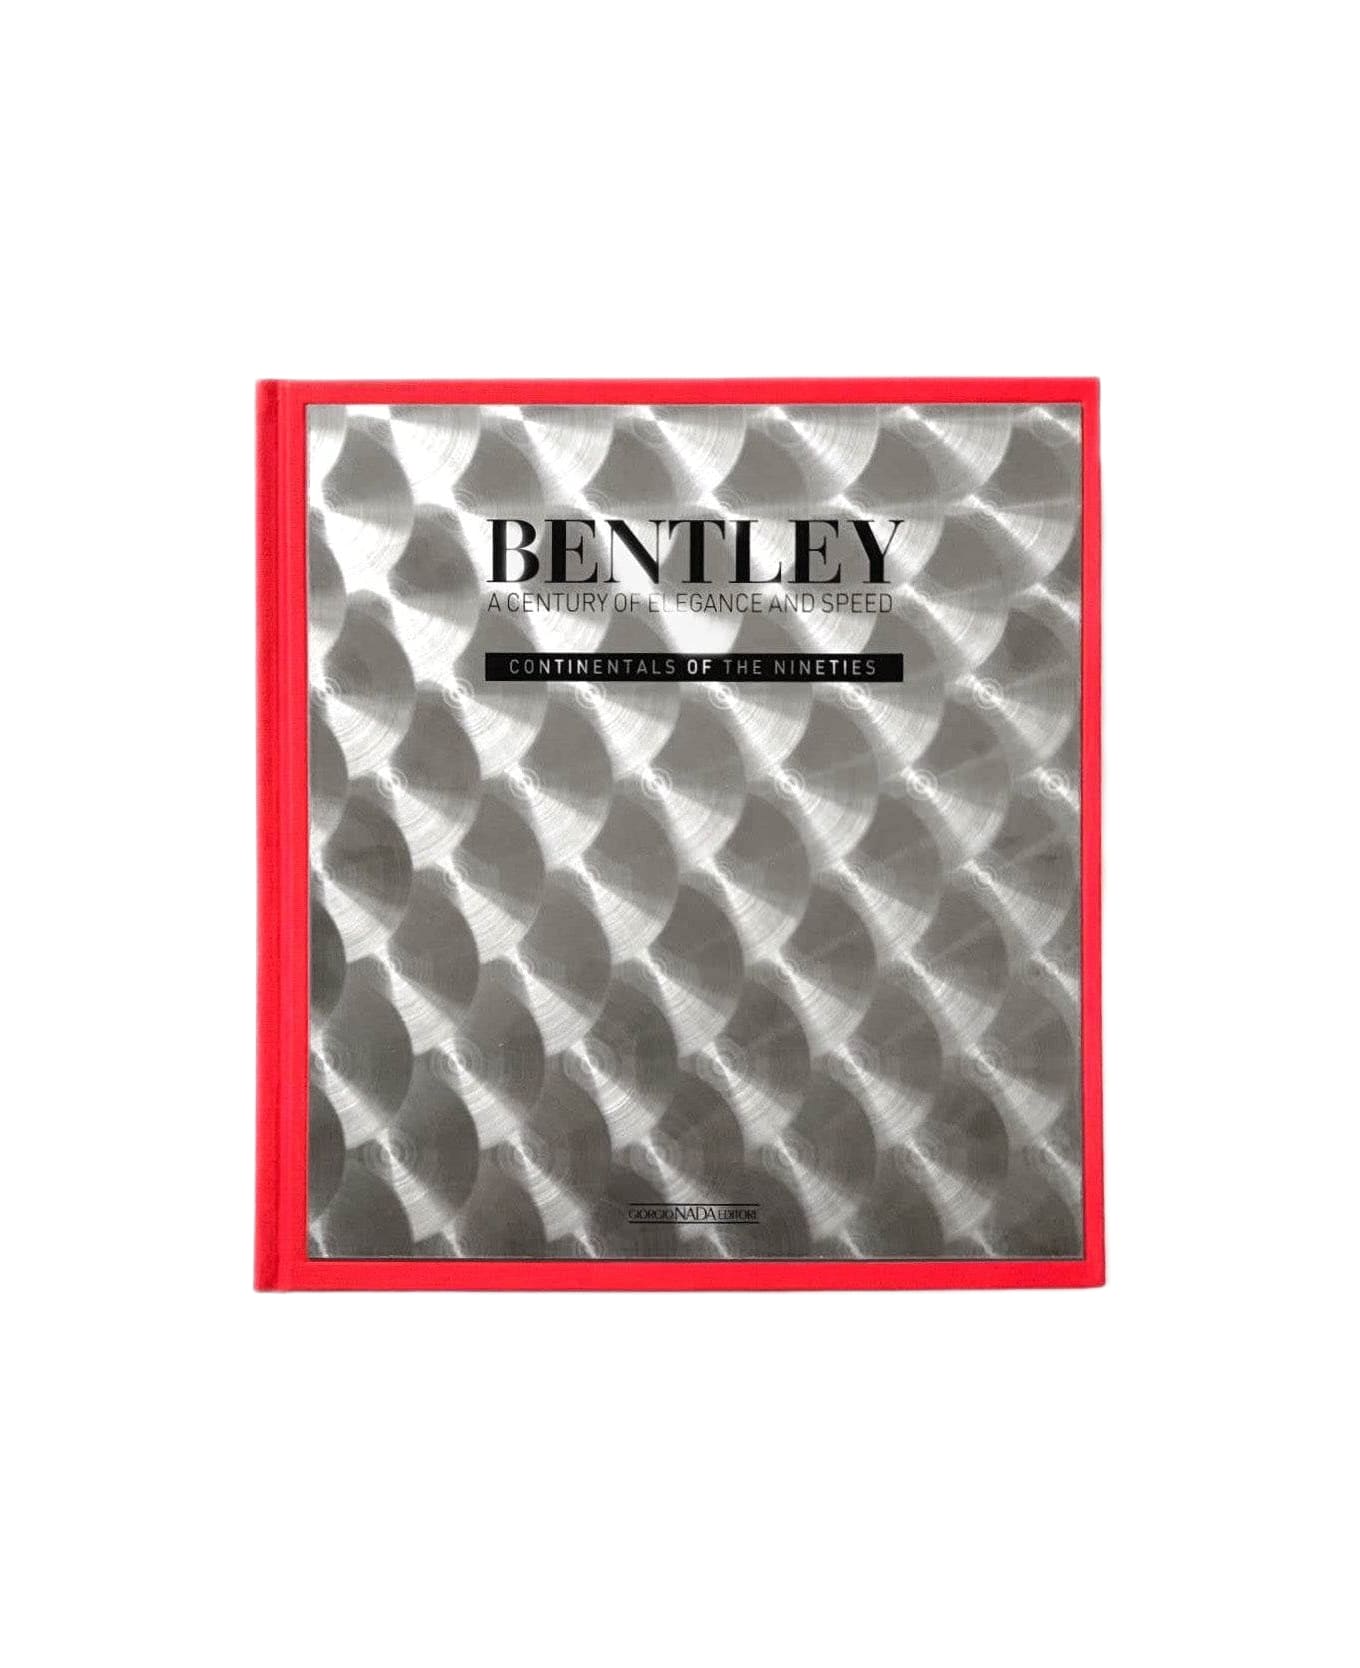 Larusmiani Bentley Book "a Century Of Elegance And Speed"  - Neutral